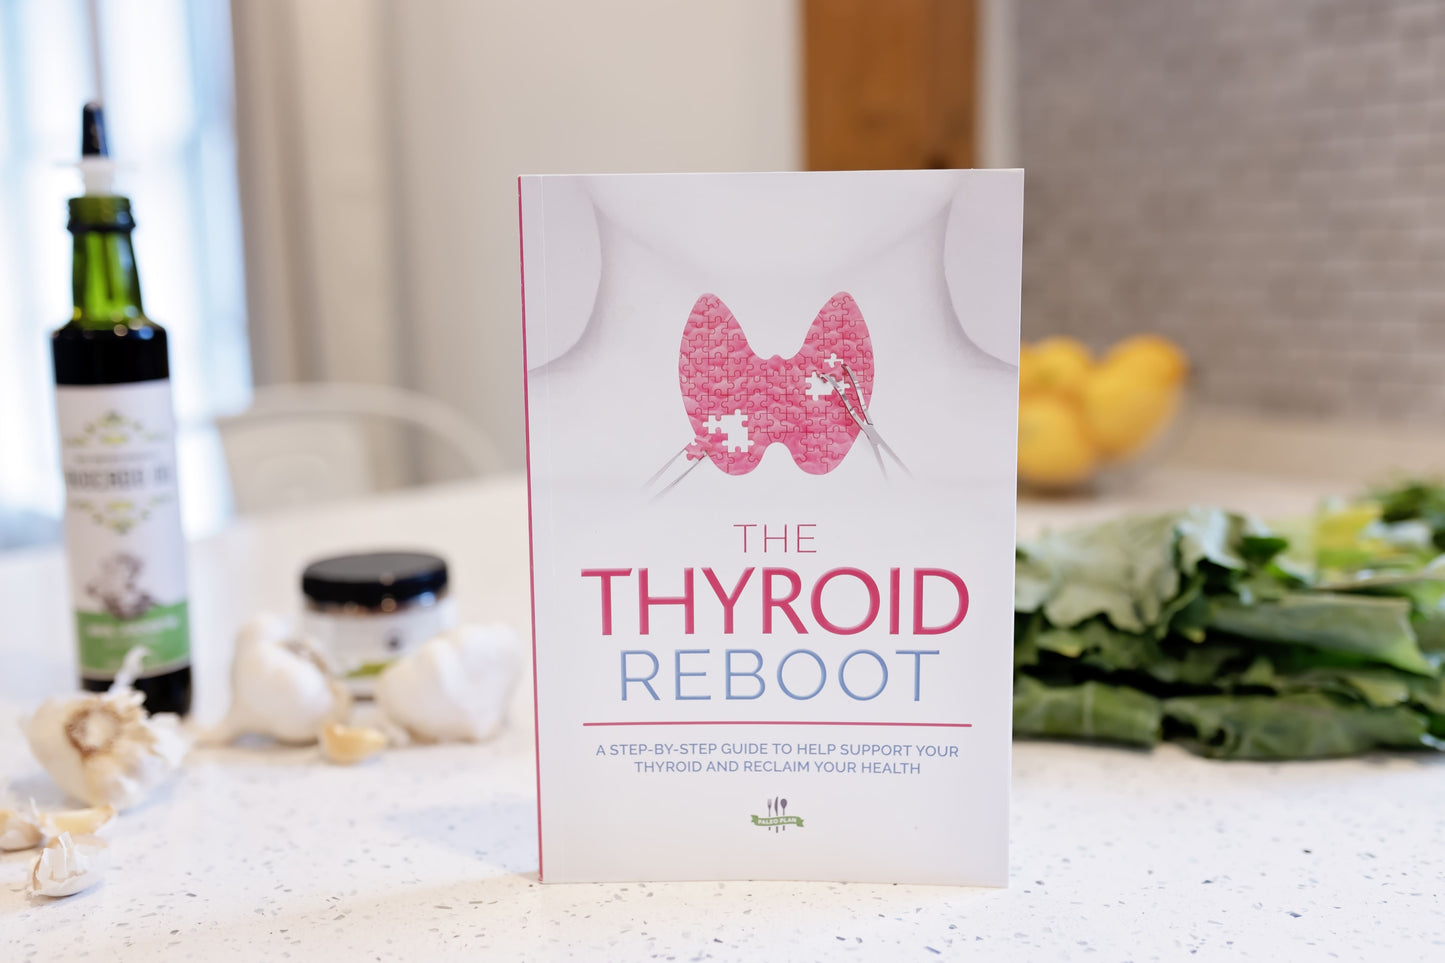 The Thyroid Reboot Book is positioned on a white plain surface, with vegetables and an avocado oil bottle in the background.